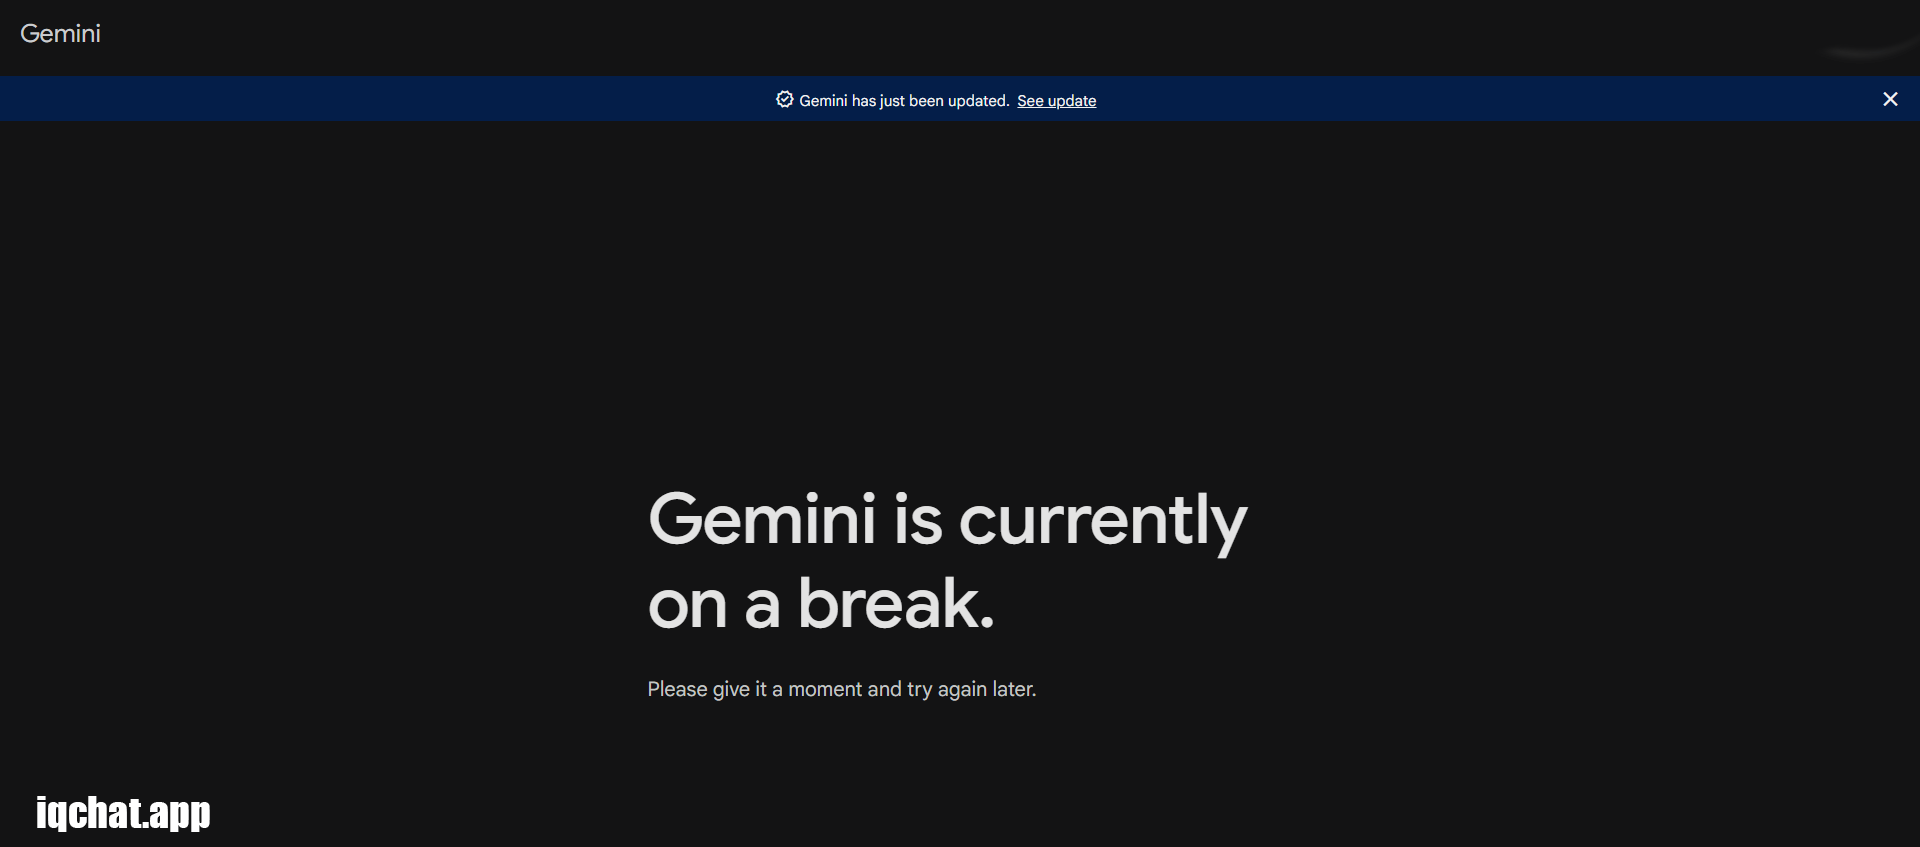  Gemini is currently on a break give it a moment